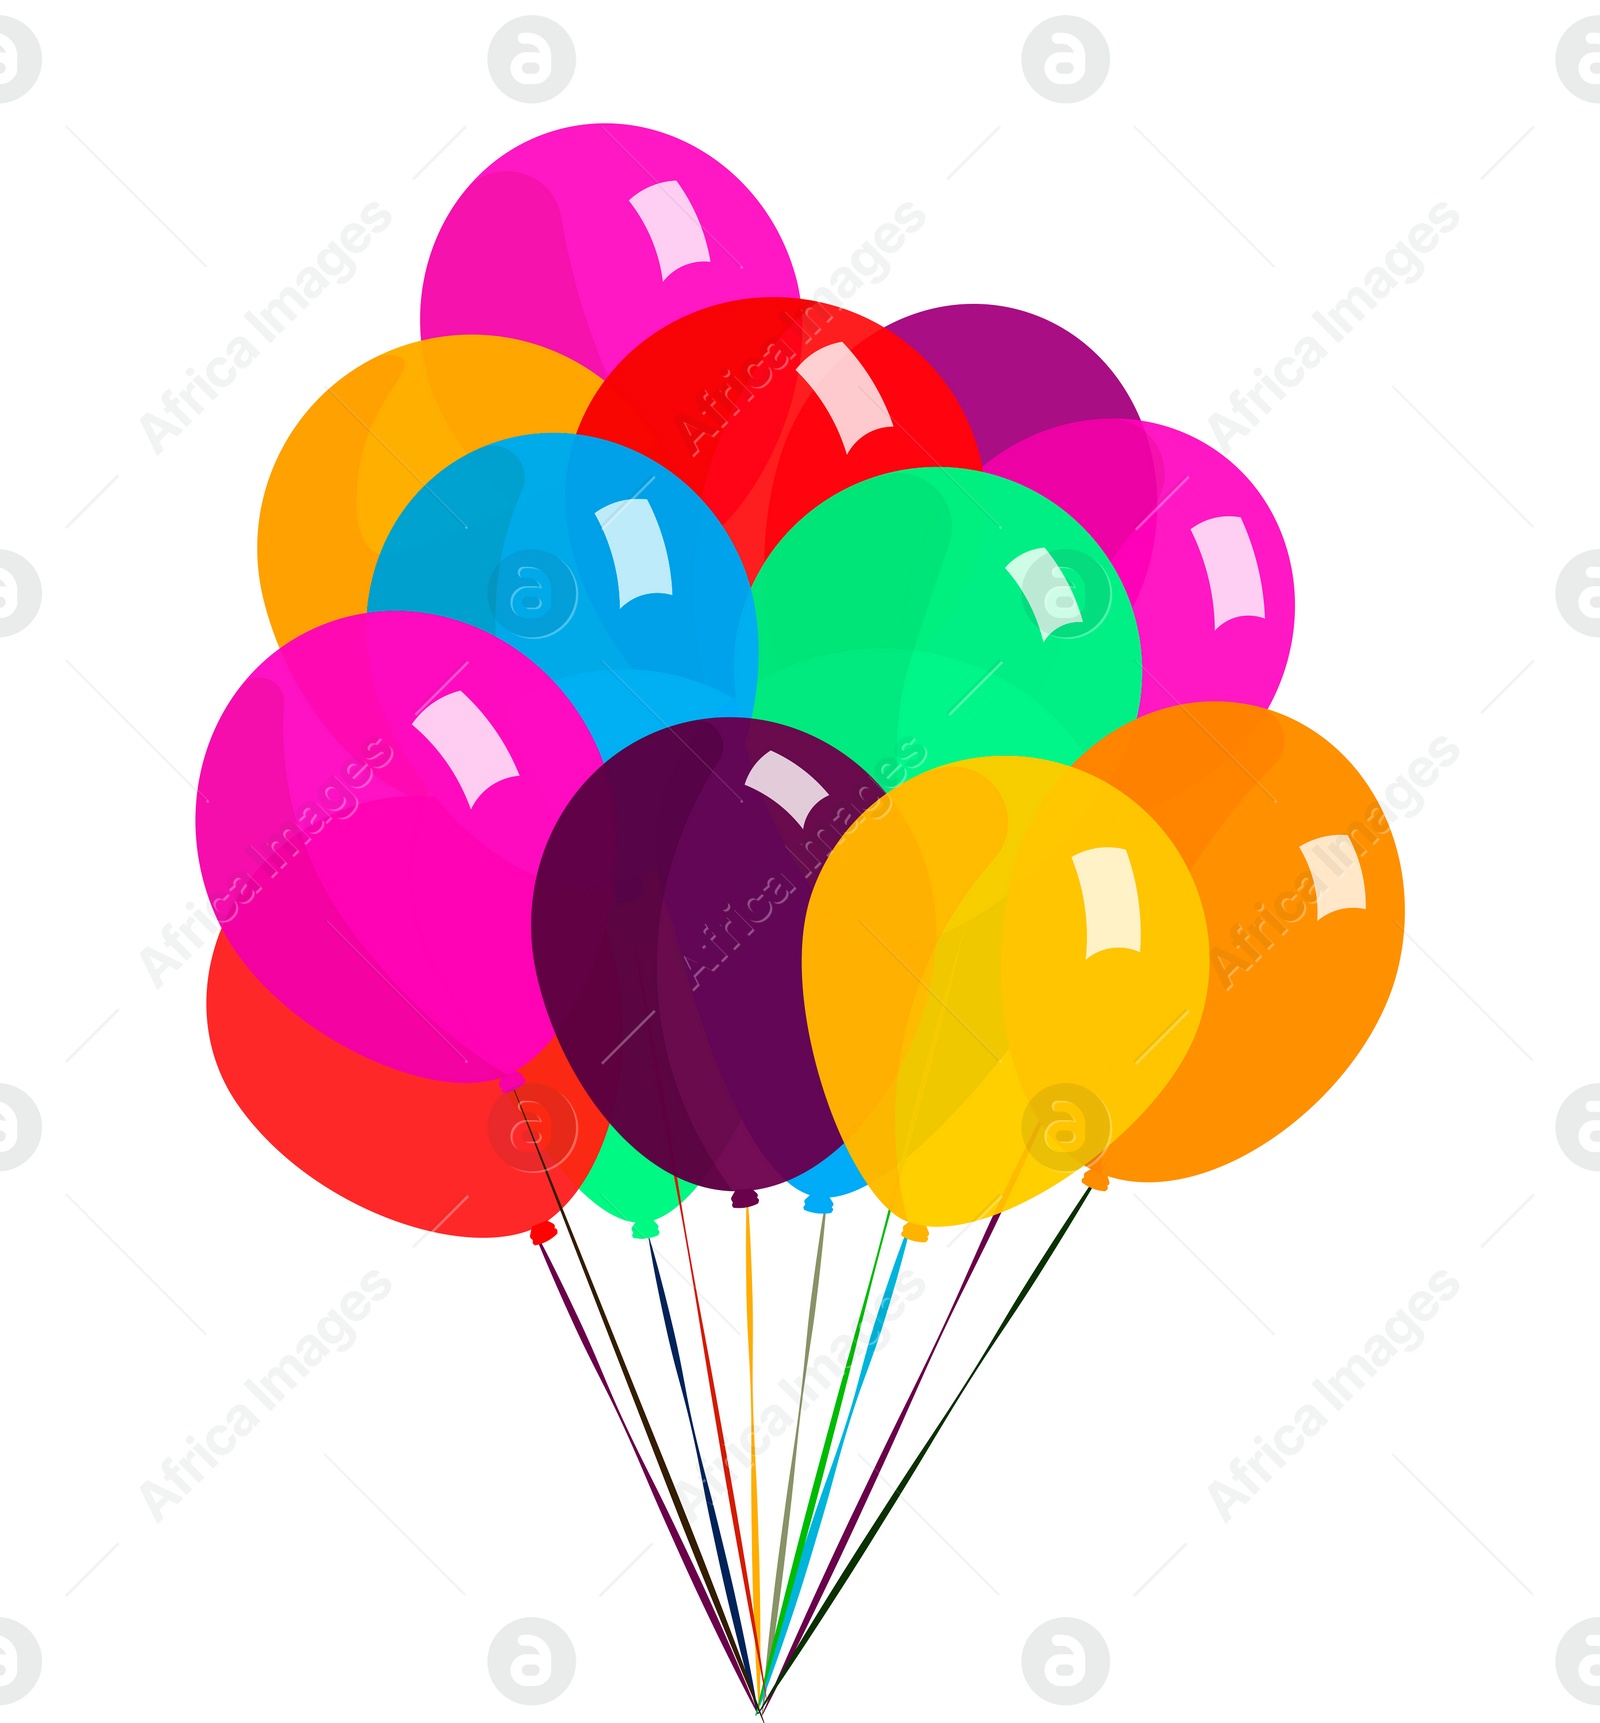 Illustration of Bunch of colorful balloons on white background